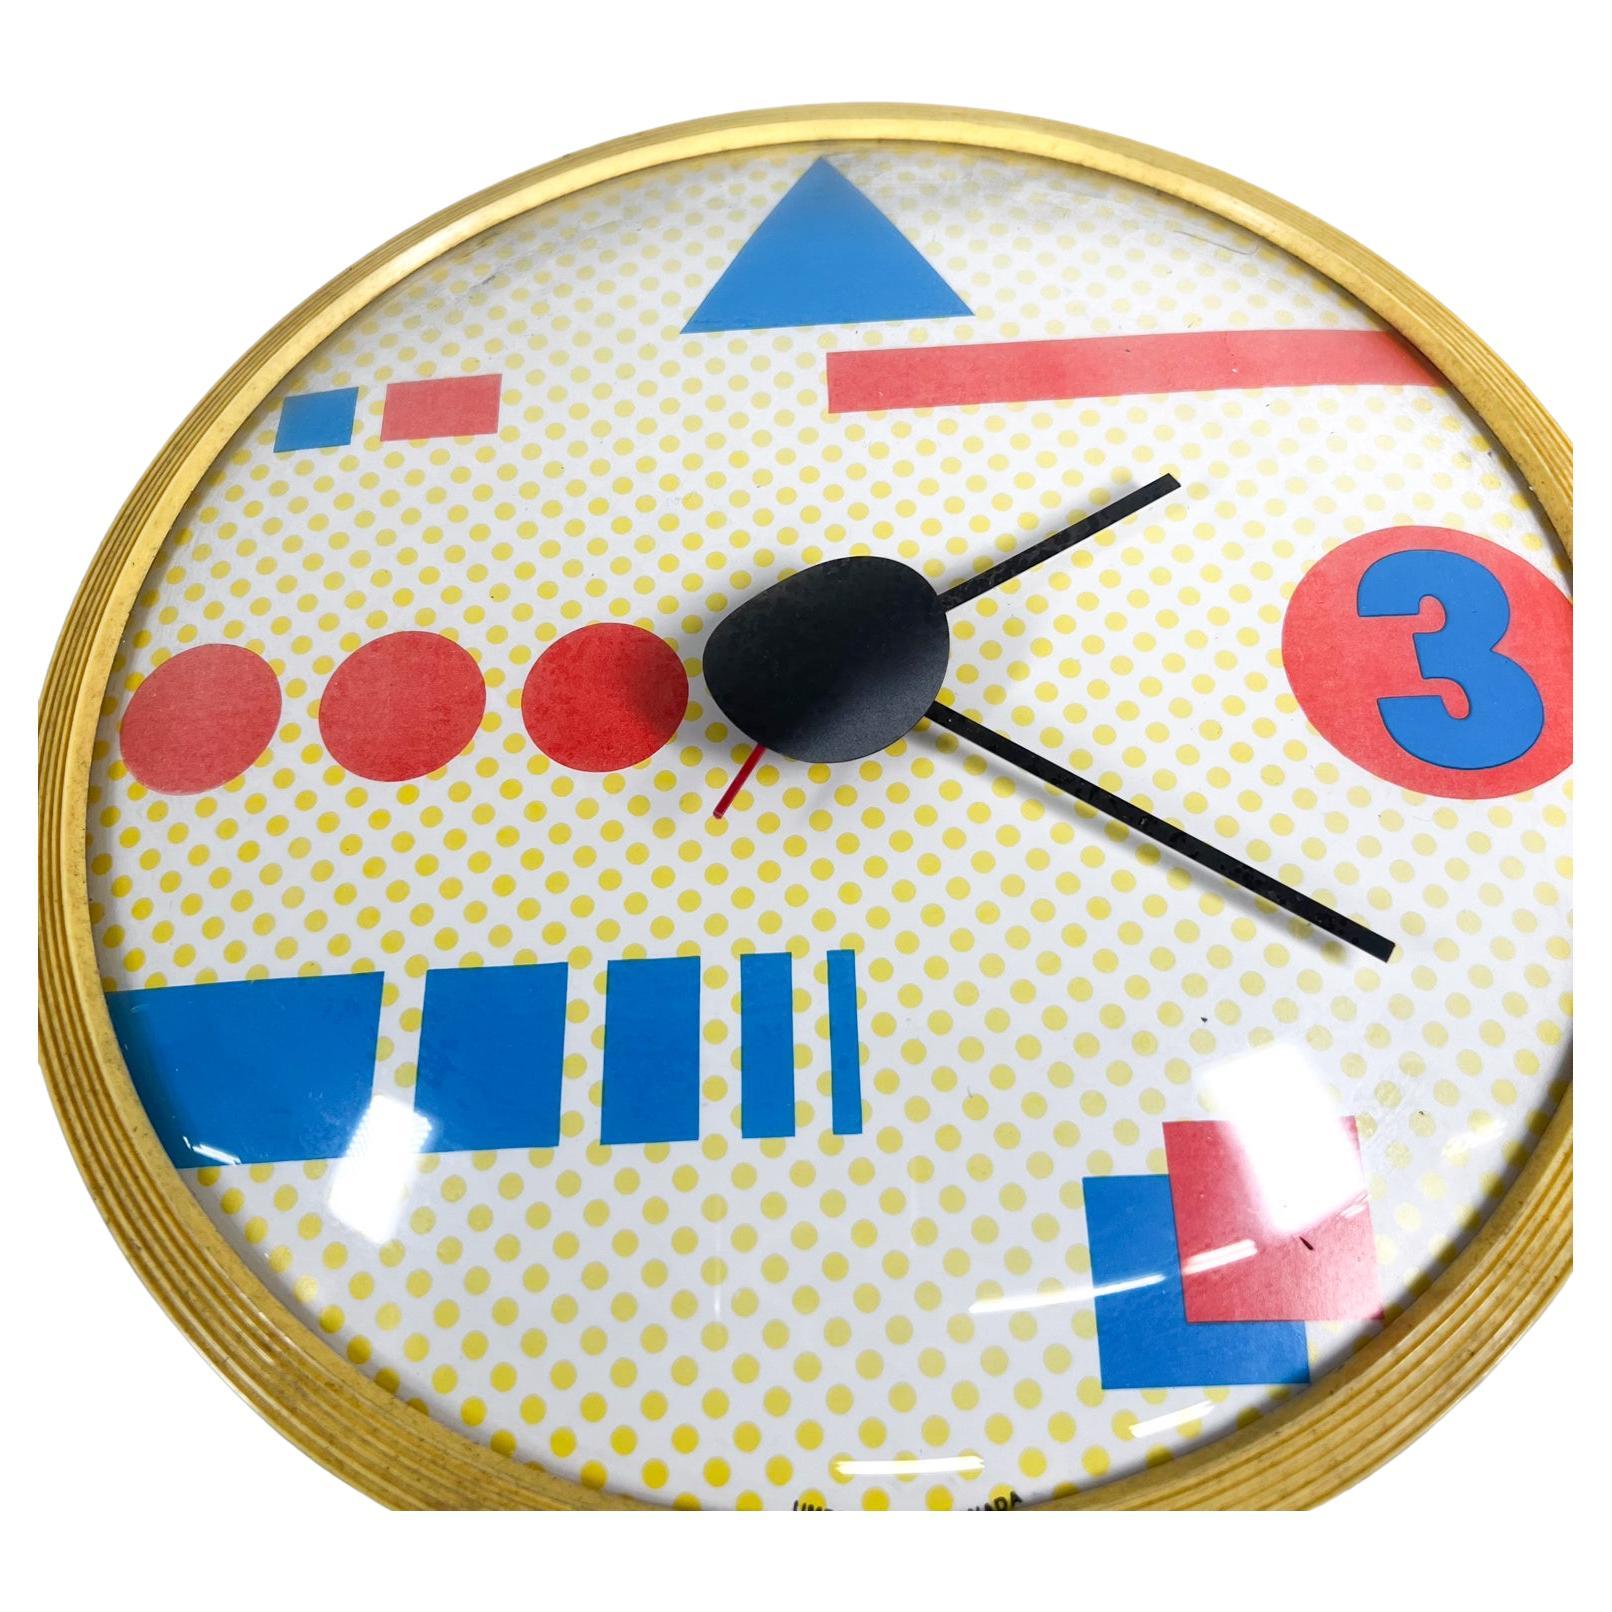 1980s UMBRA Canada Colorful Quartz Wall Clock Memphis Style
Maker stamped Umbra Canada Made in USA
11 diameter x 2 d
Original vintage condition.
Tested and working.
See all images.